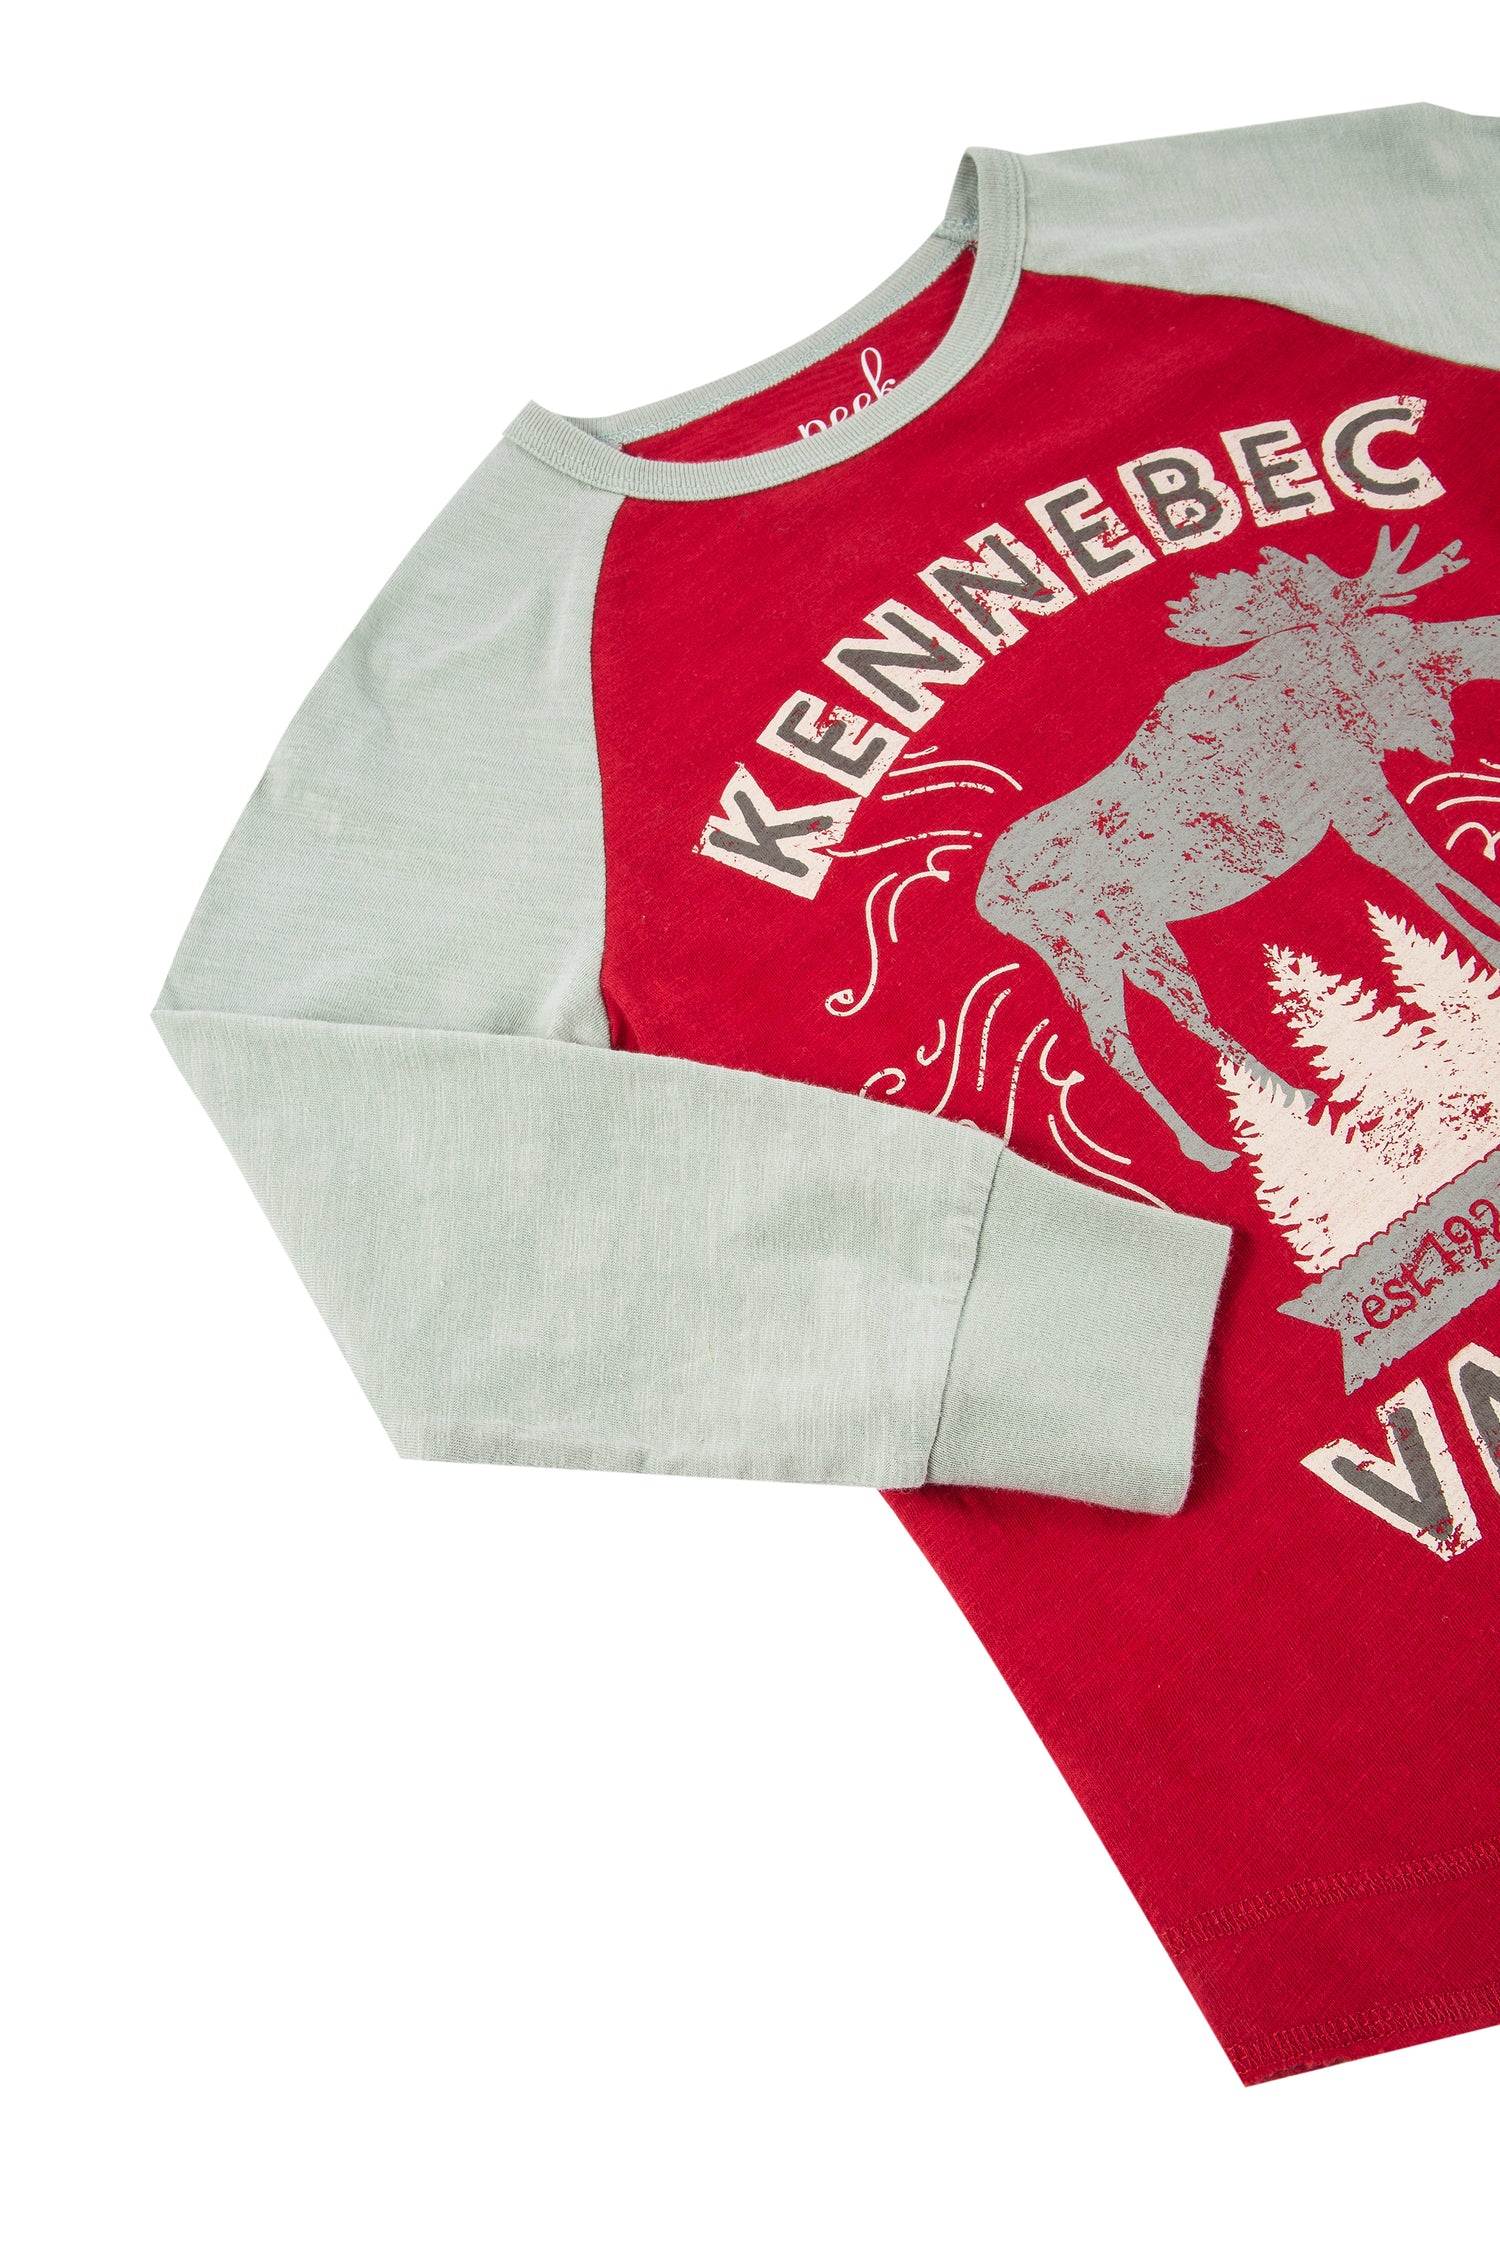 Close up view of red long sleeve with a moose and "Kennebec" written